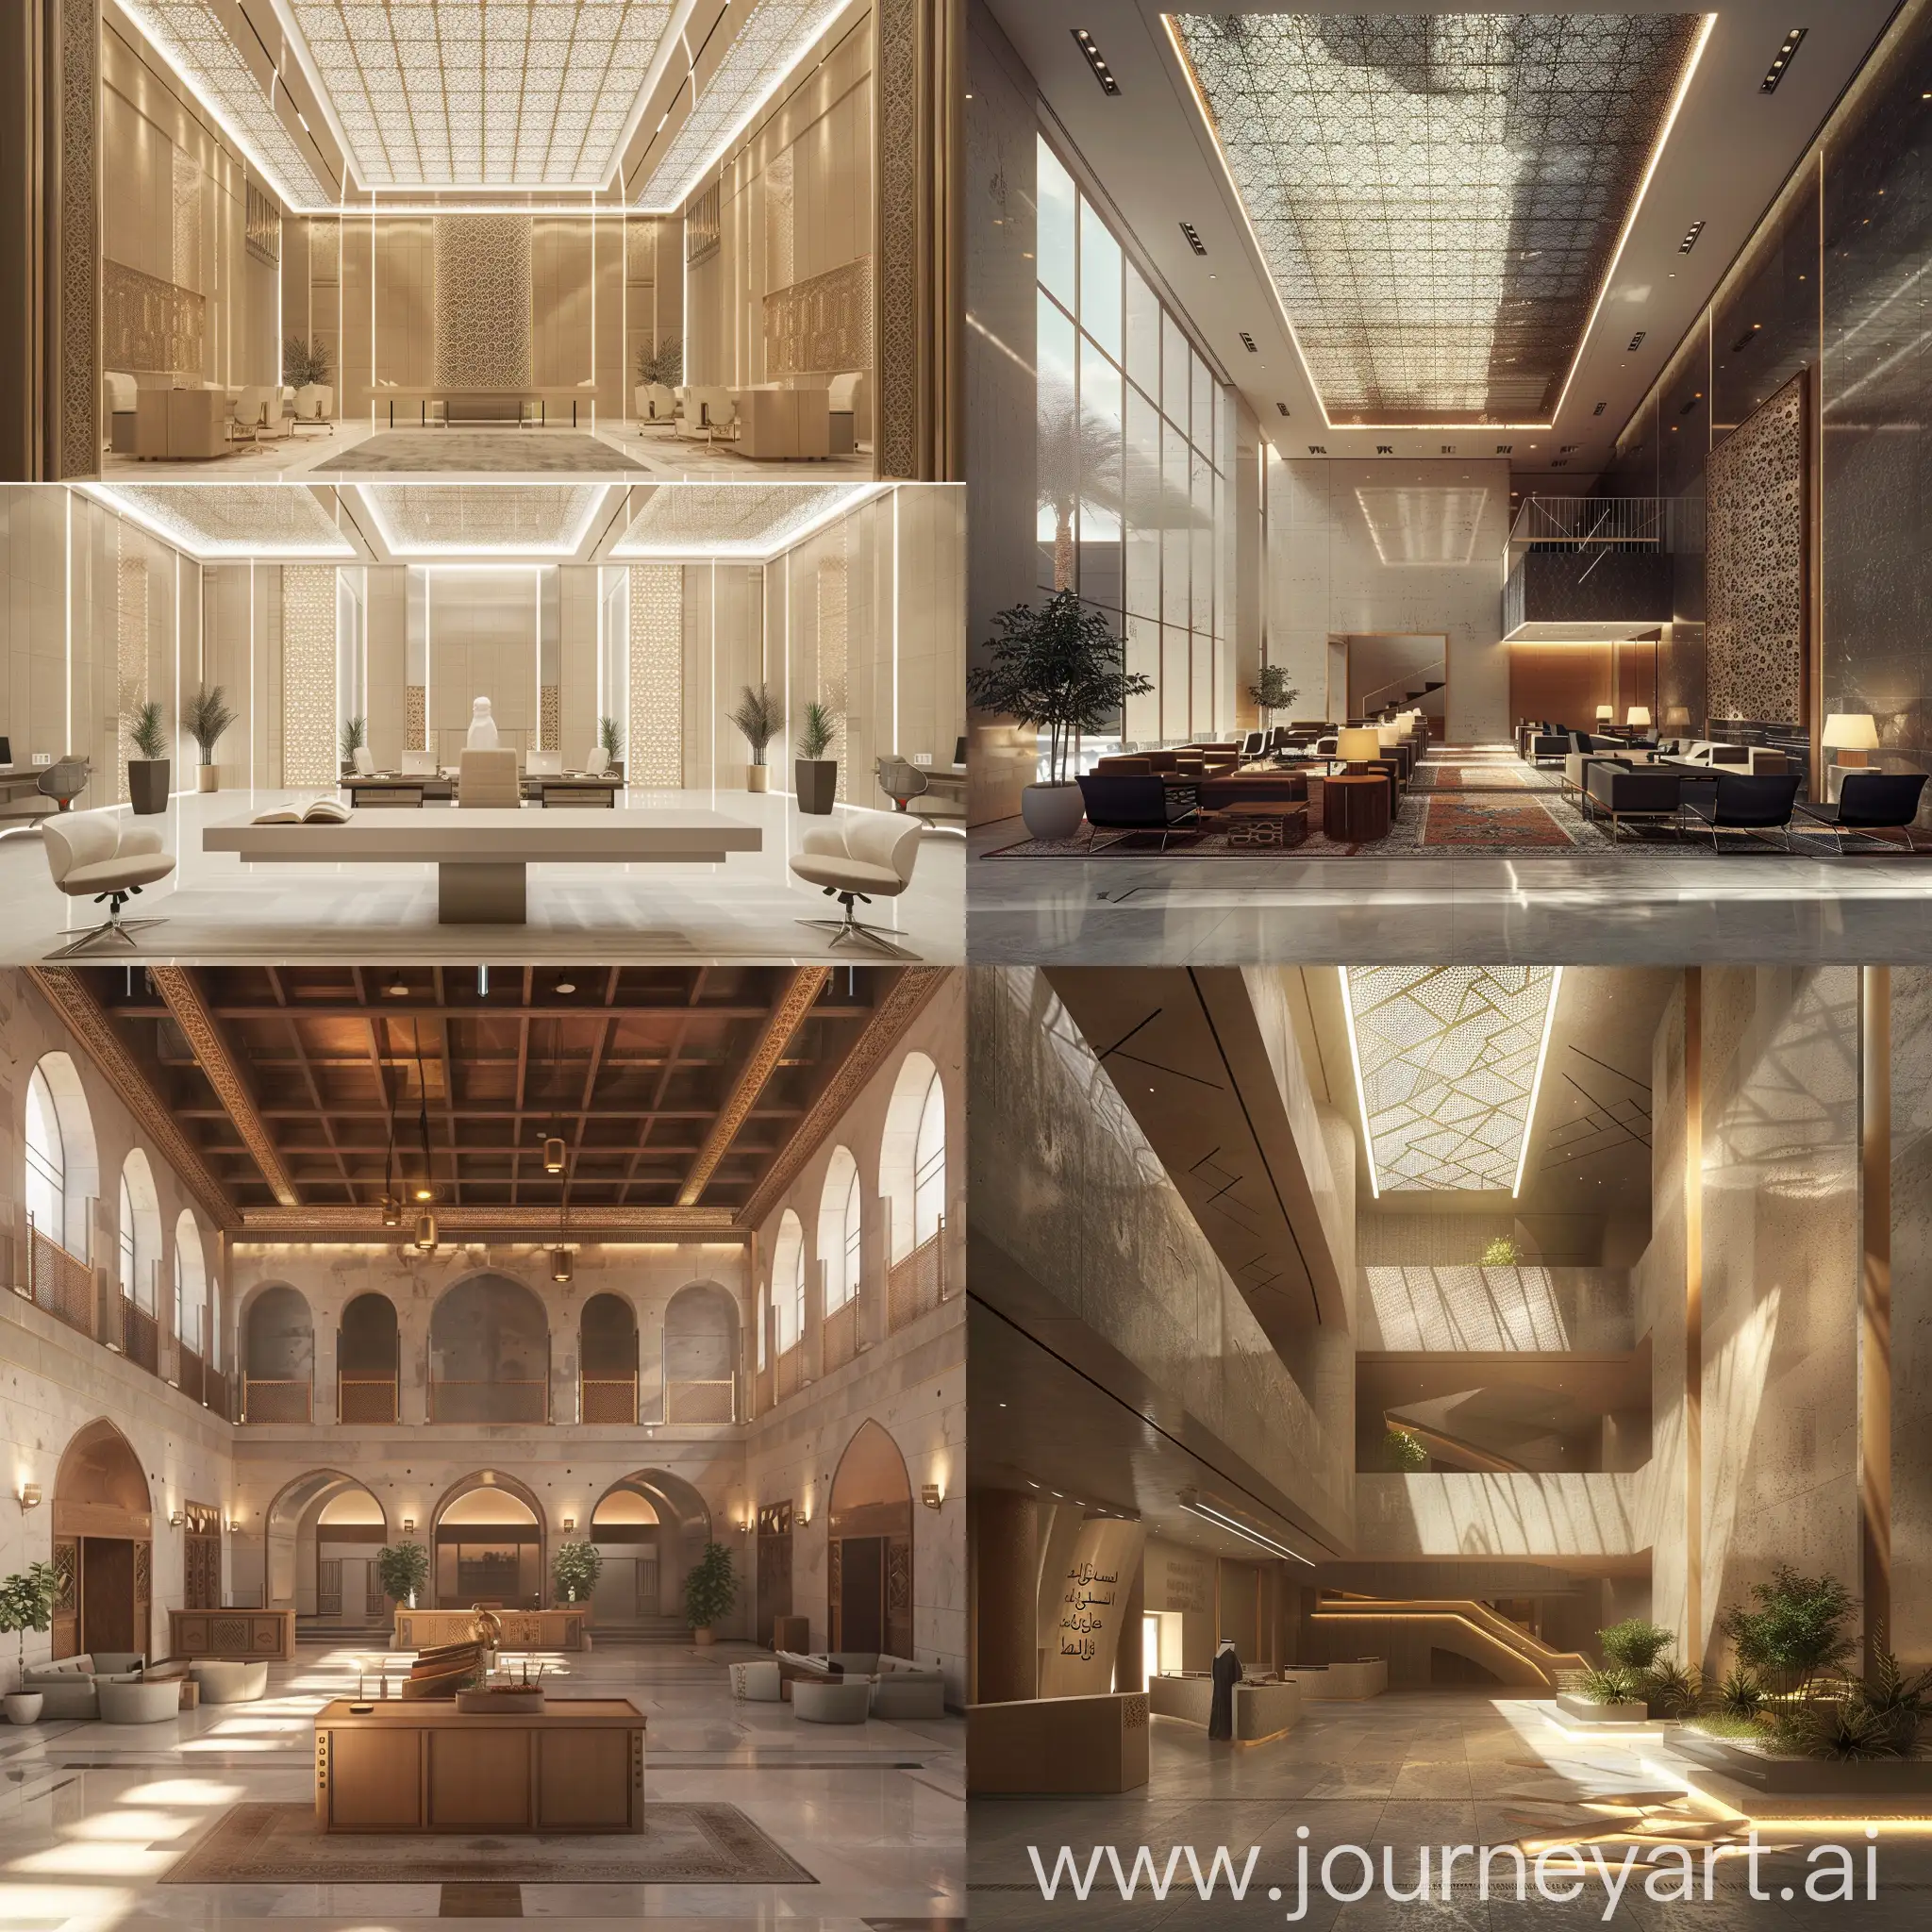 can you generate an interior shots for office building at Saudi Arabia with a concept of reviving KSA heritage with a modern way